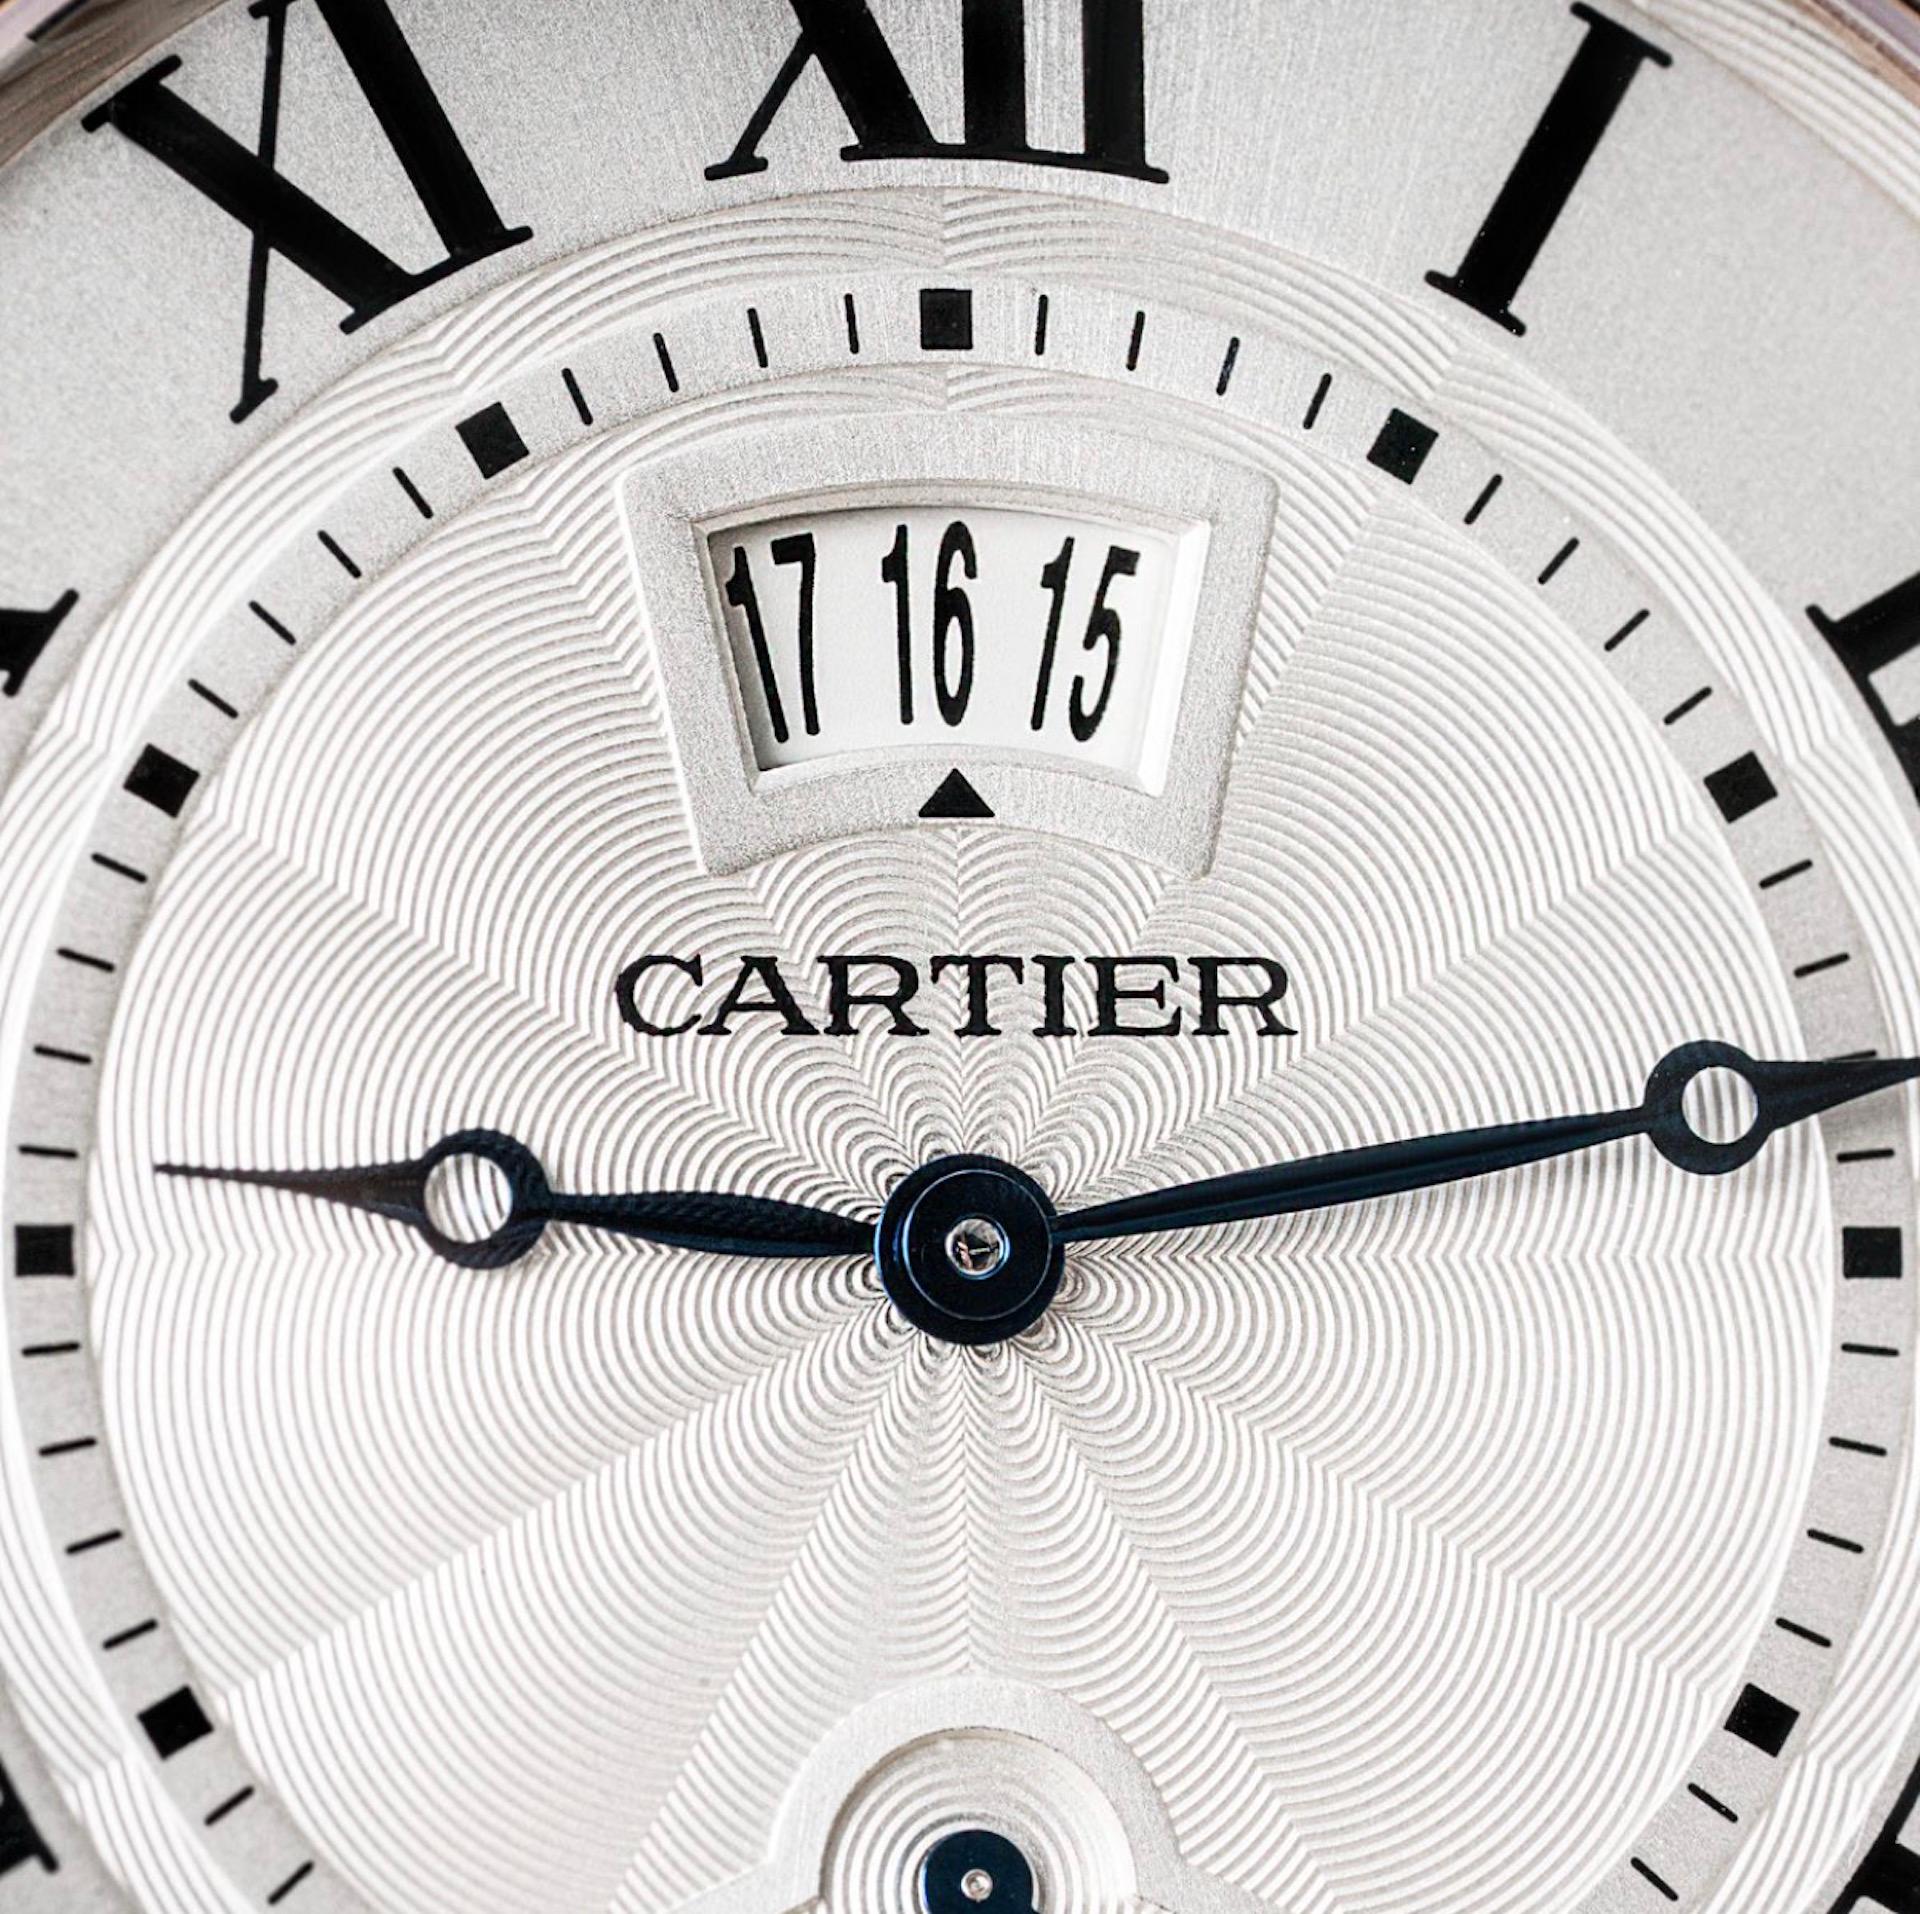 A rose gold Cartier Rotonde wristwatch. Featuring a silvered guilloche dial with roman numerals, a date display, a power reserve indicator and blued steel hands. The watch is fitted with a sapphire glass, a manual winding movement and a Cartier